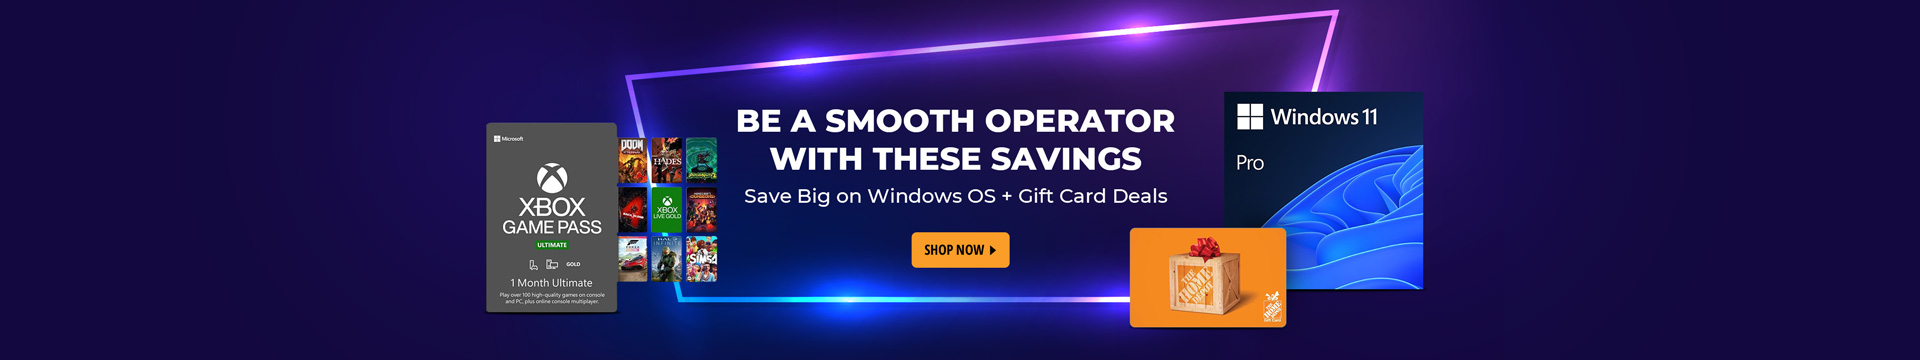 Be a Smooth Operator with These Savings